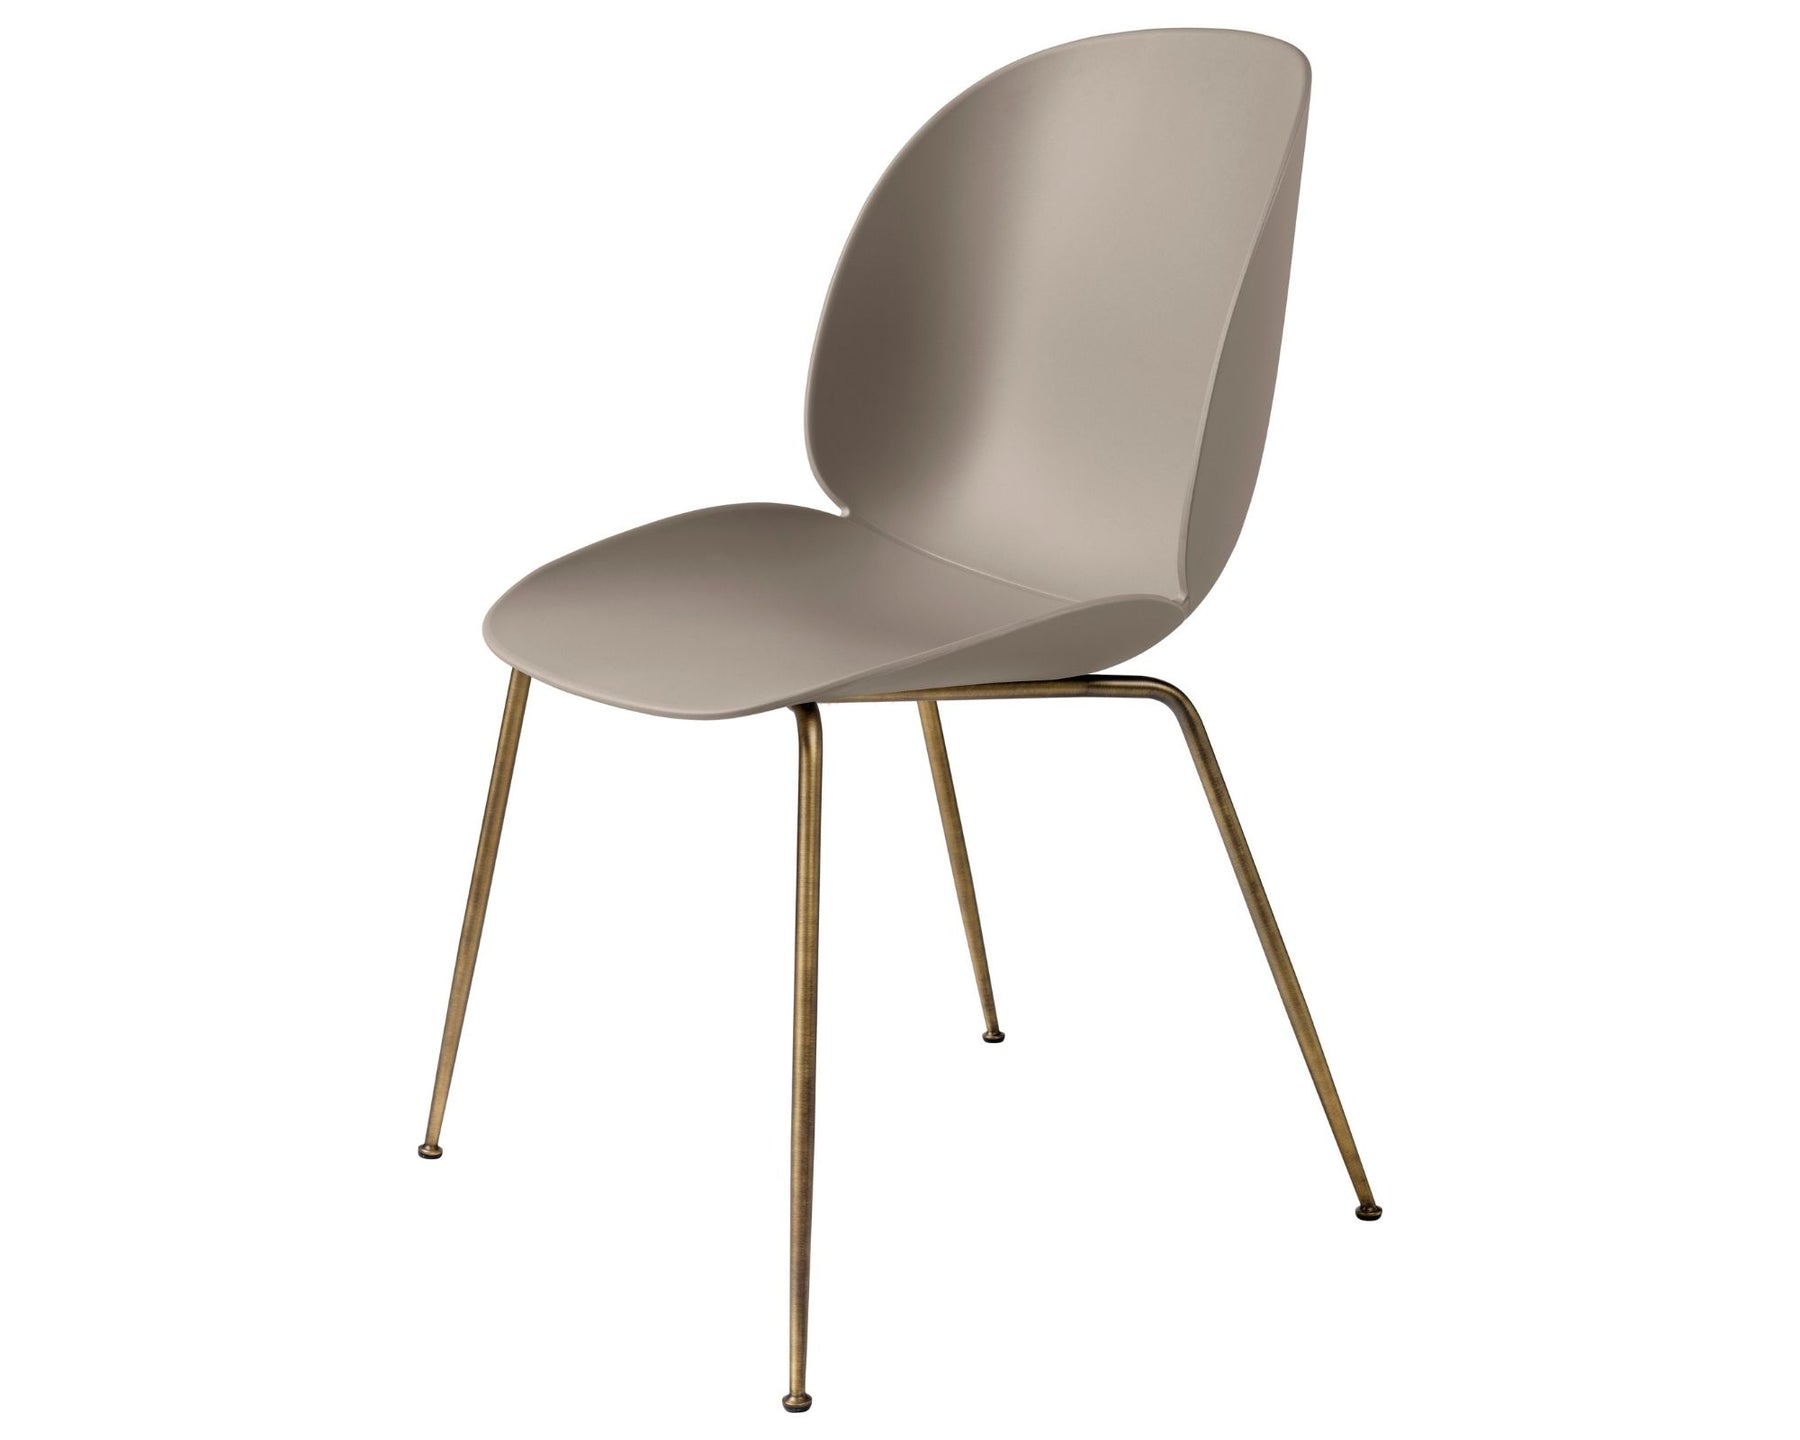 New Beige Dining Chair with Antique Brass Base | DSHOP